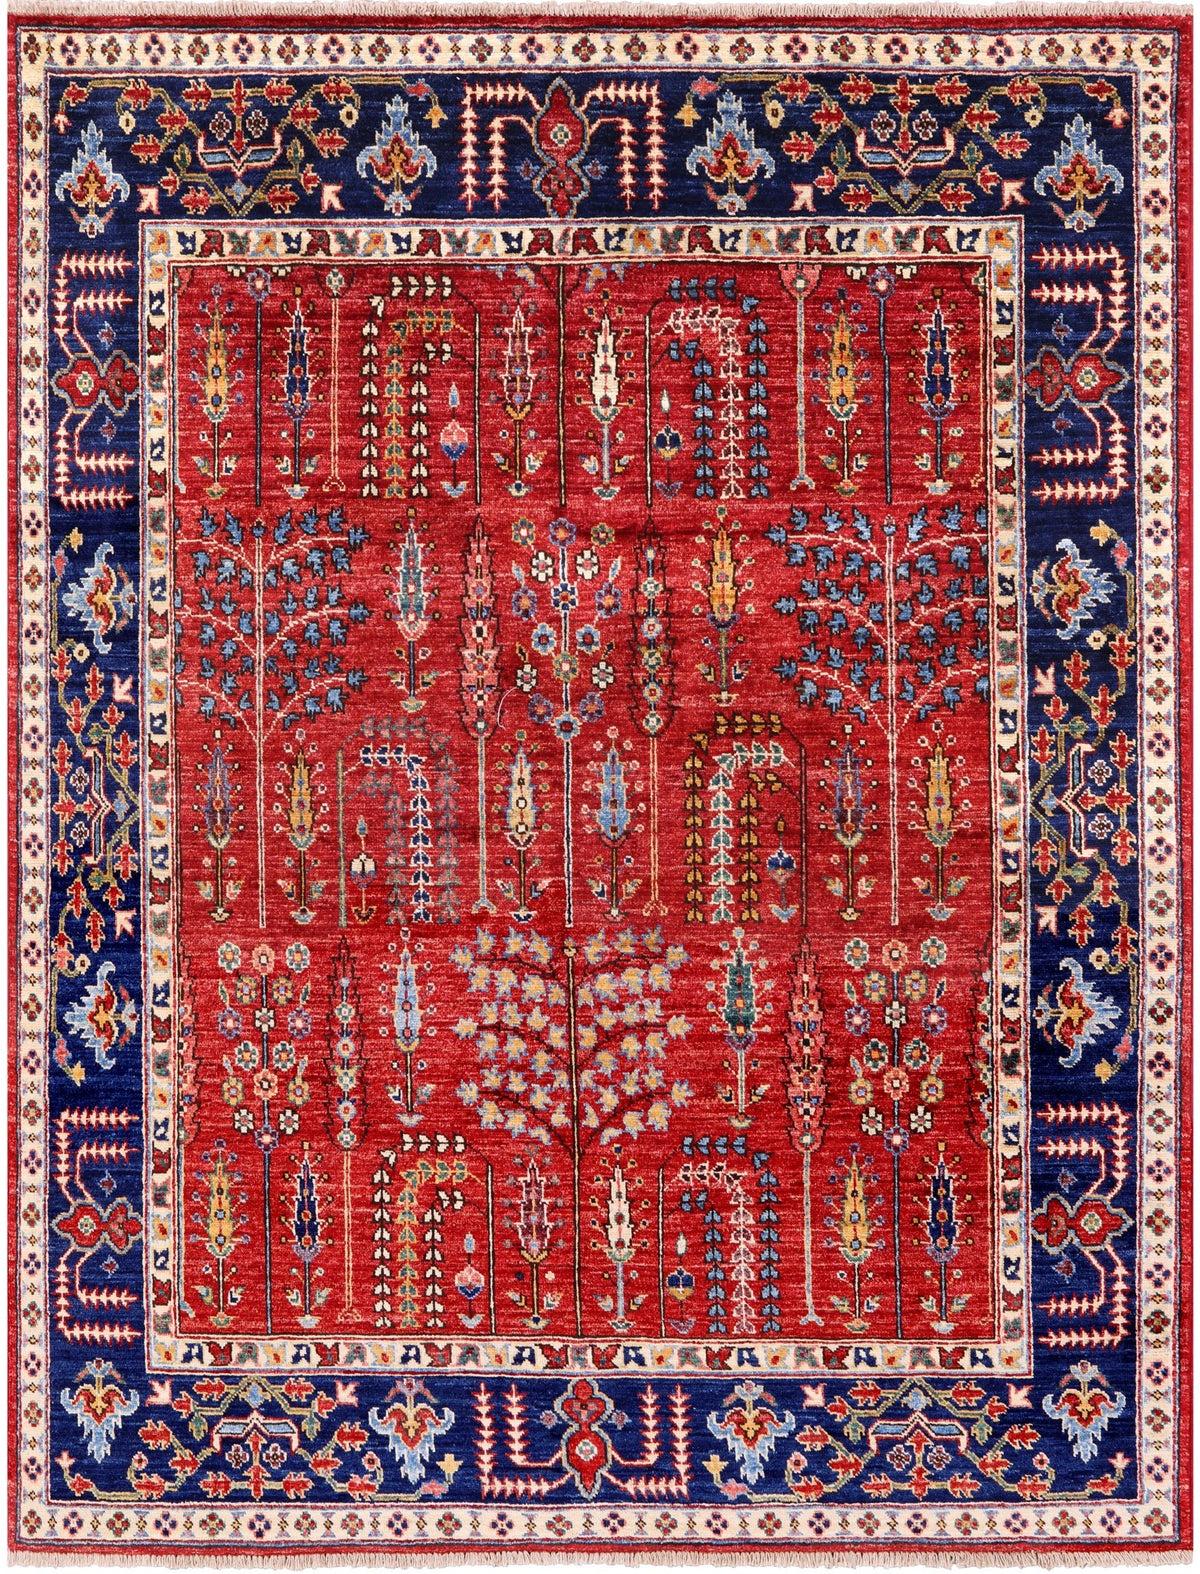 https://www.goldennile.shop/wp-content/uploads/1690/41/explore-ziegler-hand-knotted-wool-rug-4-9-x-6-0-golden-nile-and-more-shop-in-our-store-to-save-money_0.jpg